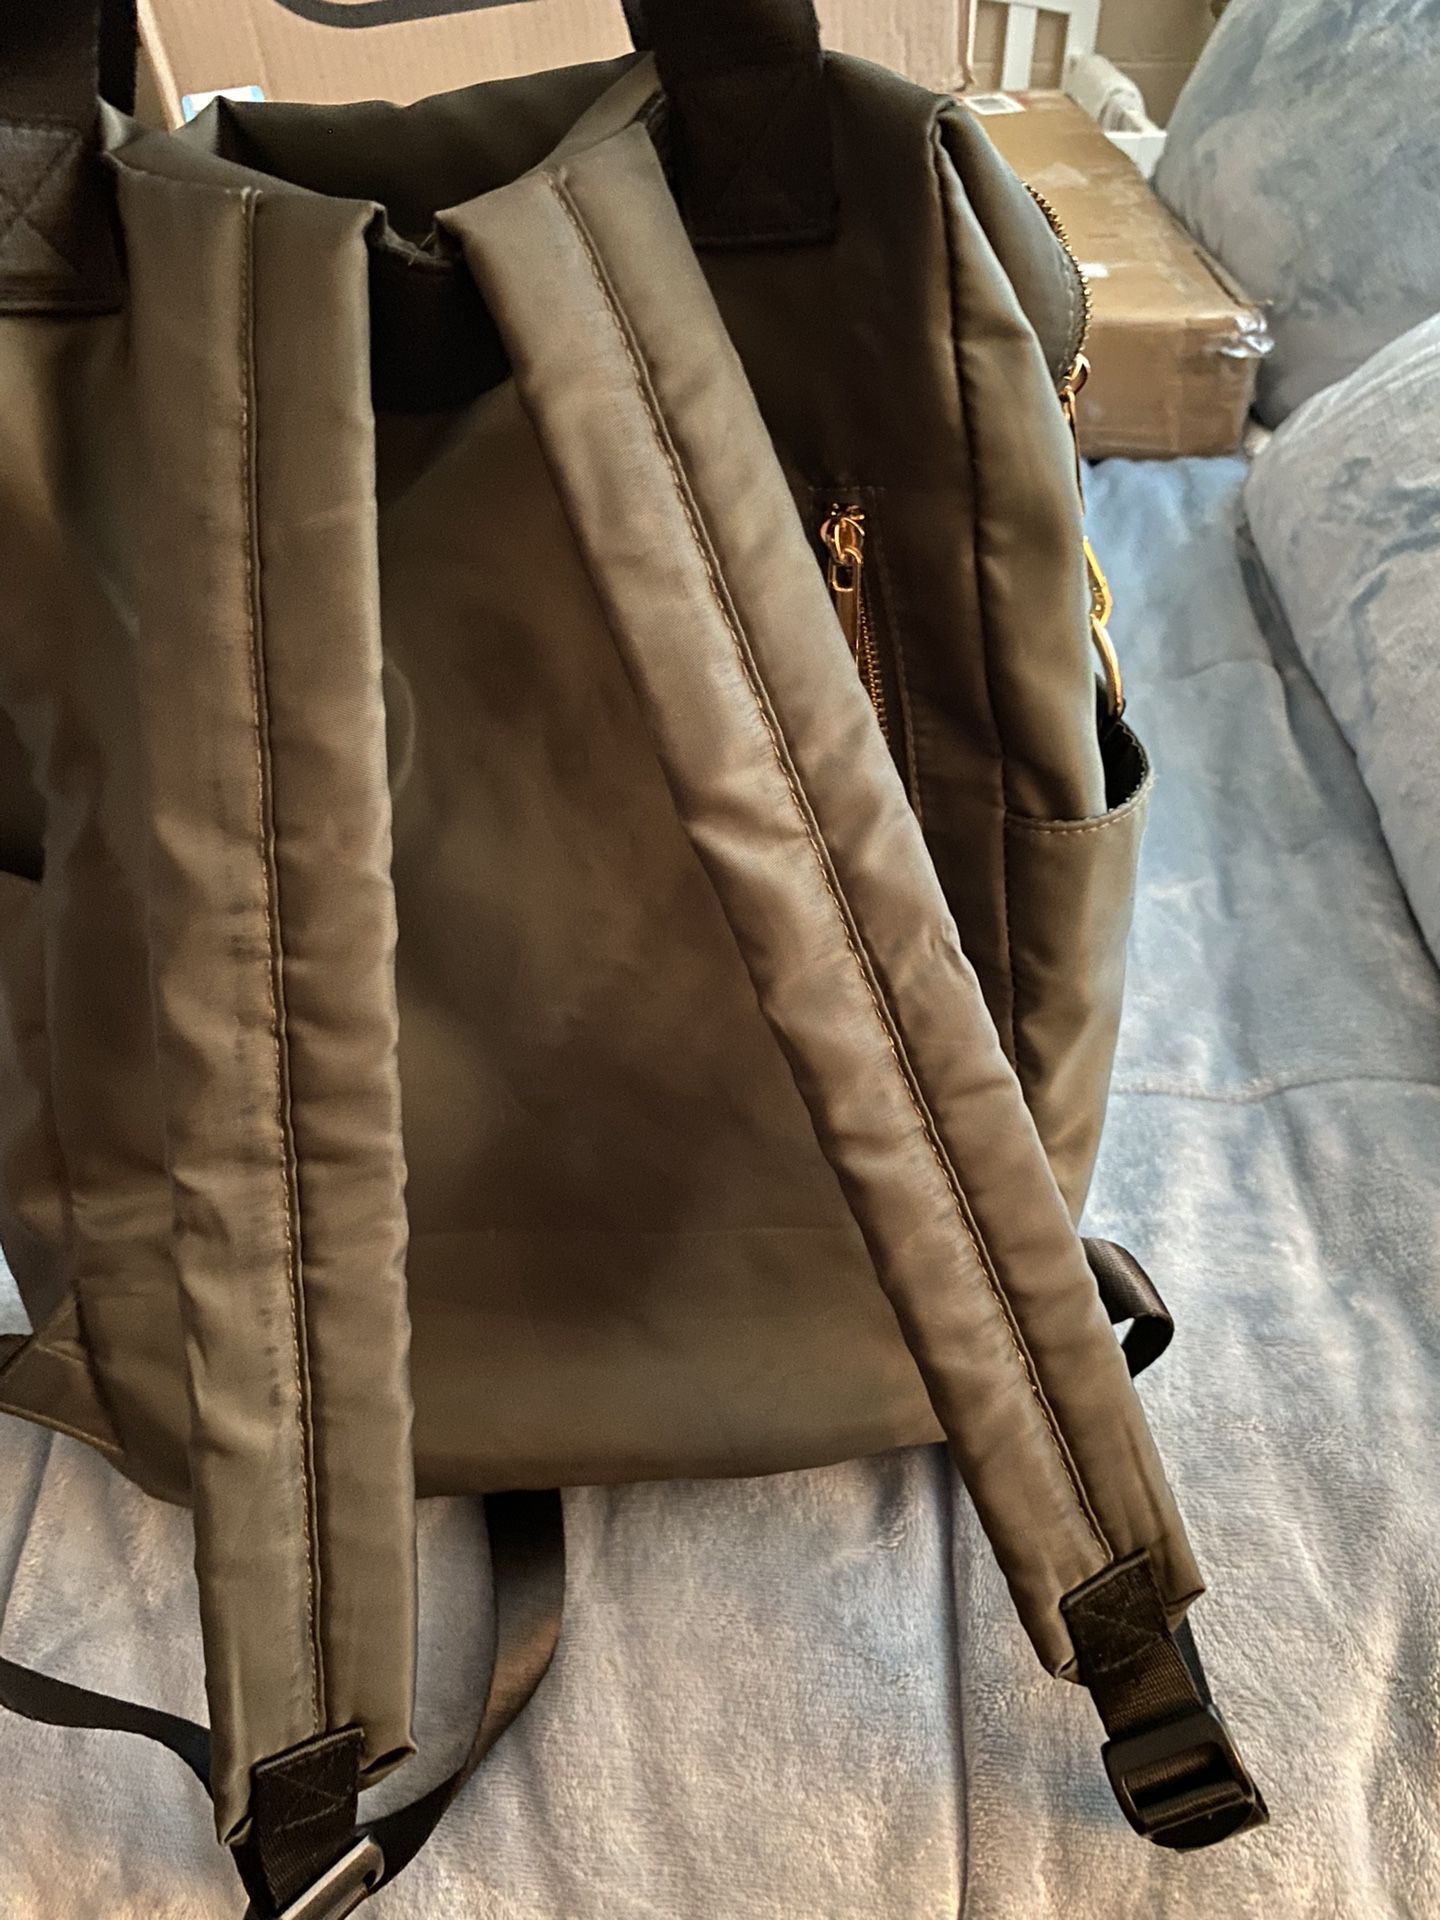 Tiny backpack by the pool monogram for Sale in Peoria, AZ - OfferUp